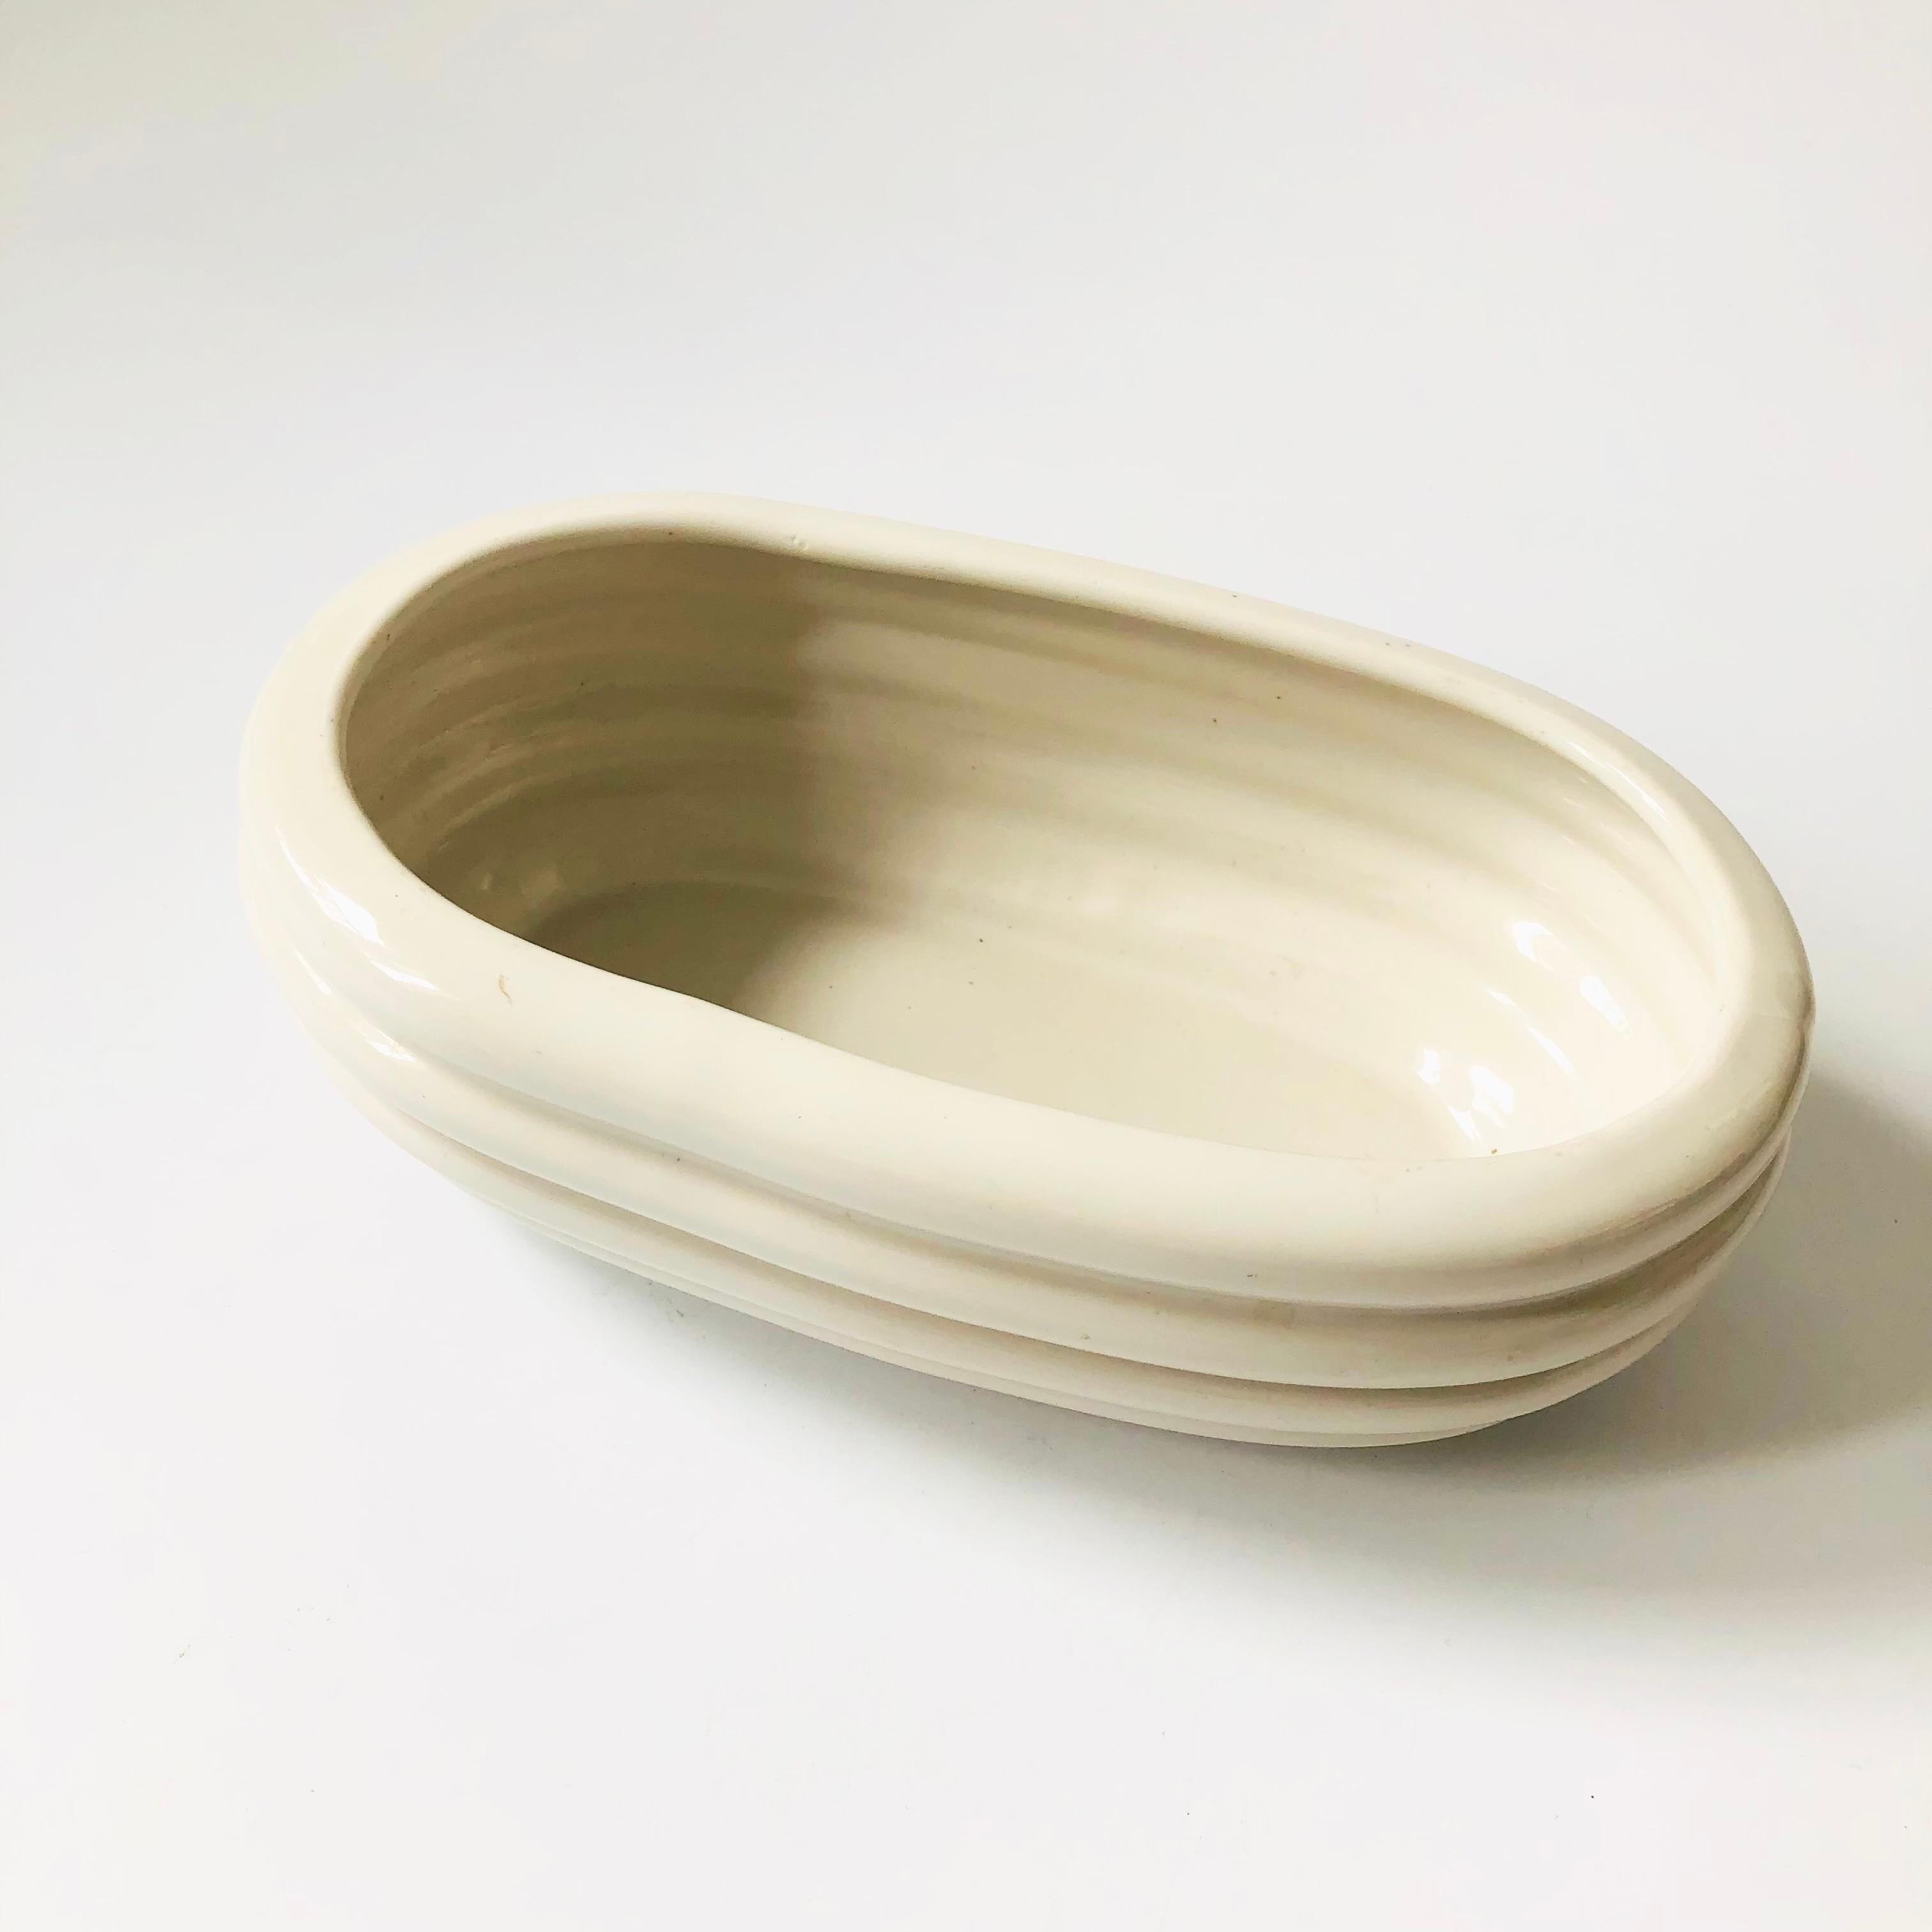 A vintage oval ceramic planter by Alamo, USA. Unique ribbed shape and finished in a glossy white glaze. Marked on the base by the manufacturer.

